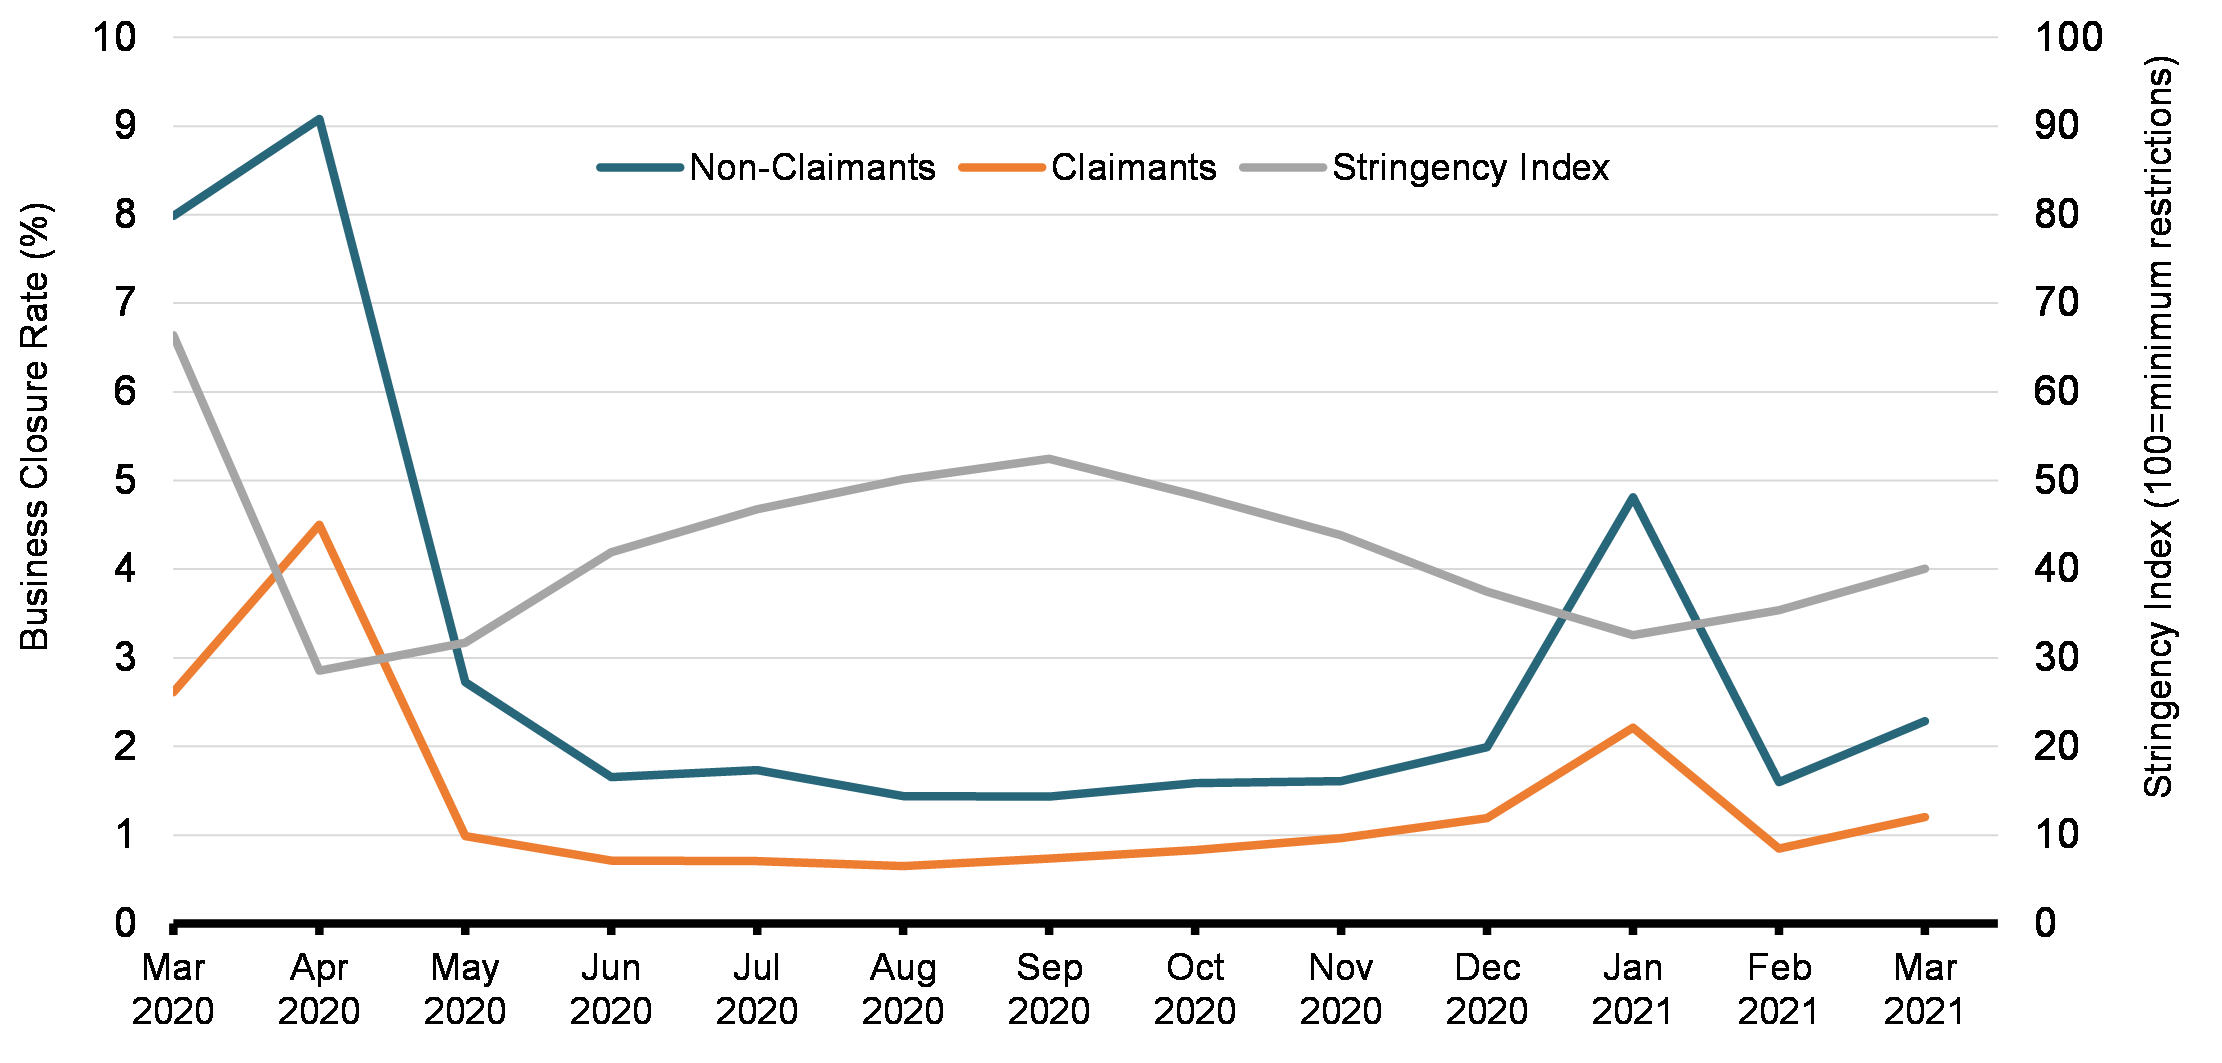 Chart 4: Business Closure Rate among CEWS Claimants and Non-Claimants, by Month
